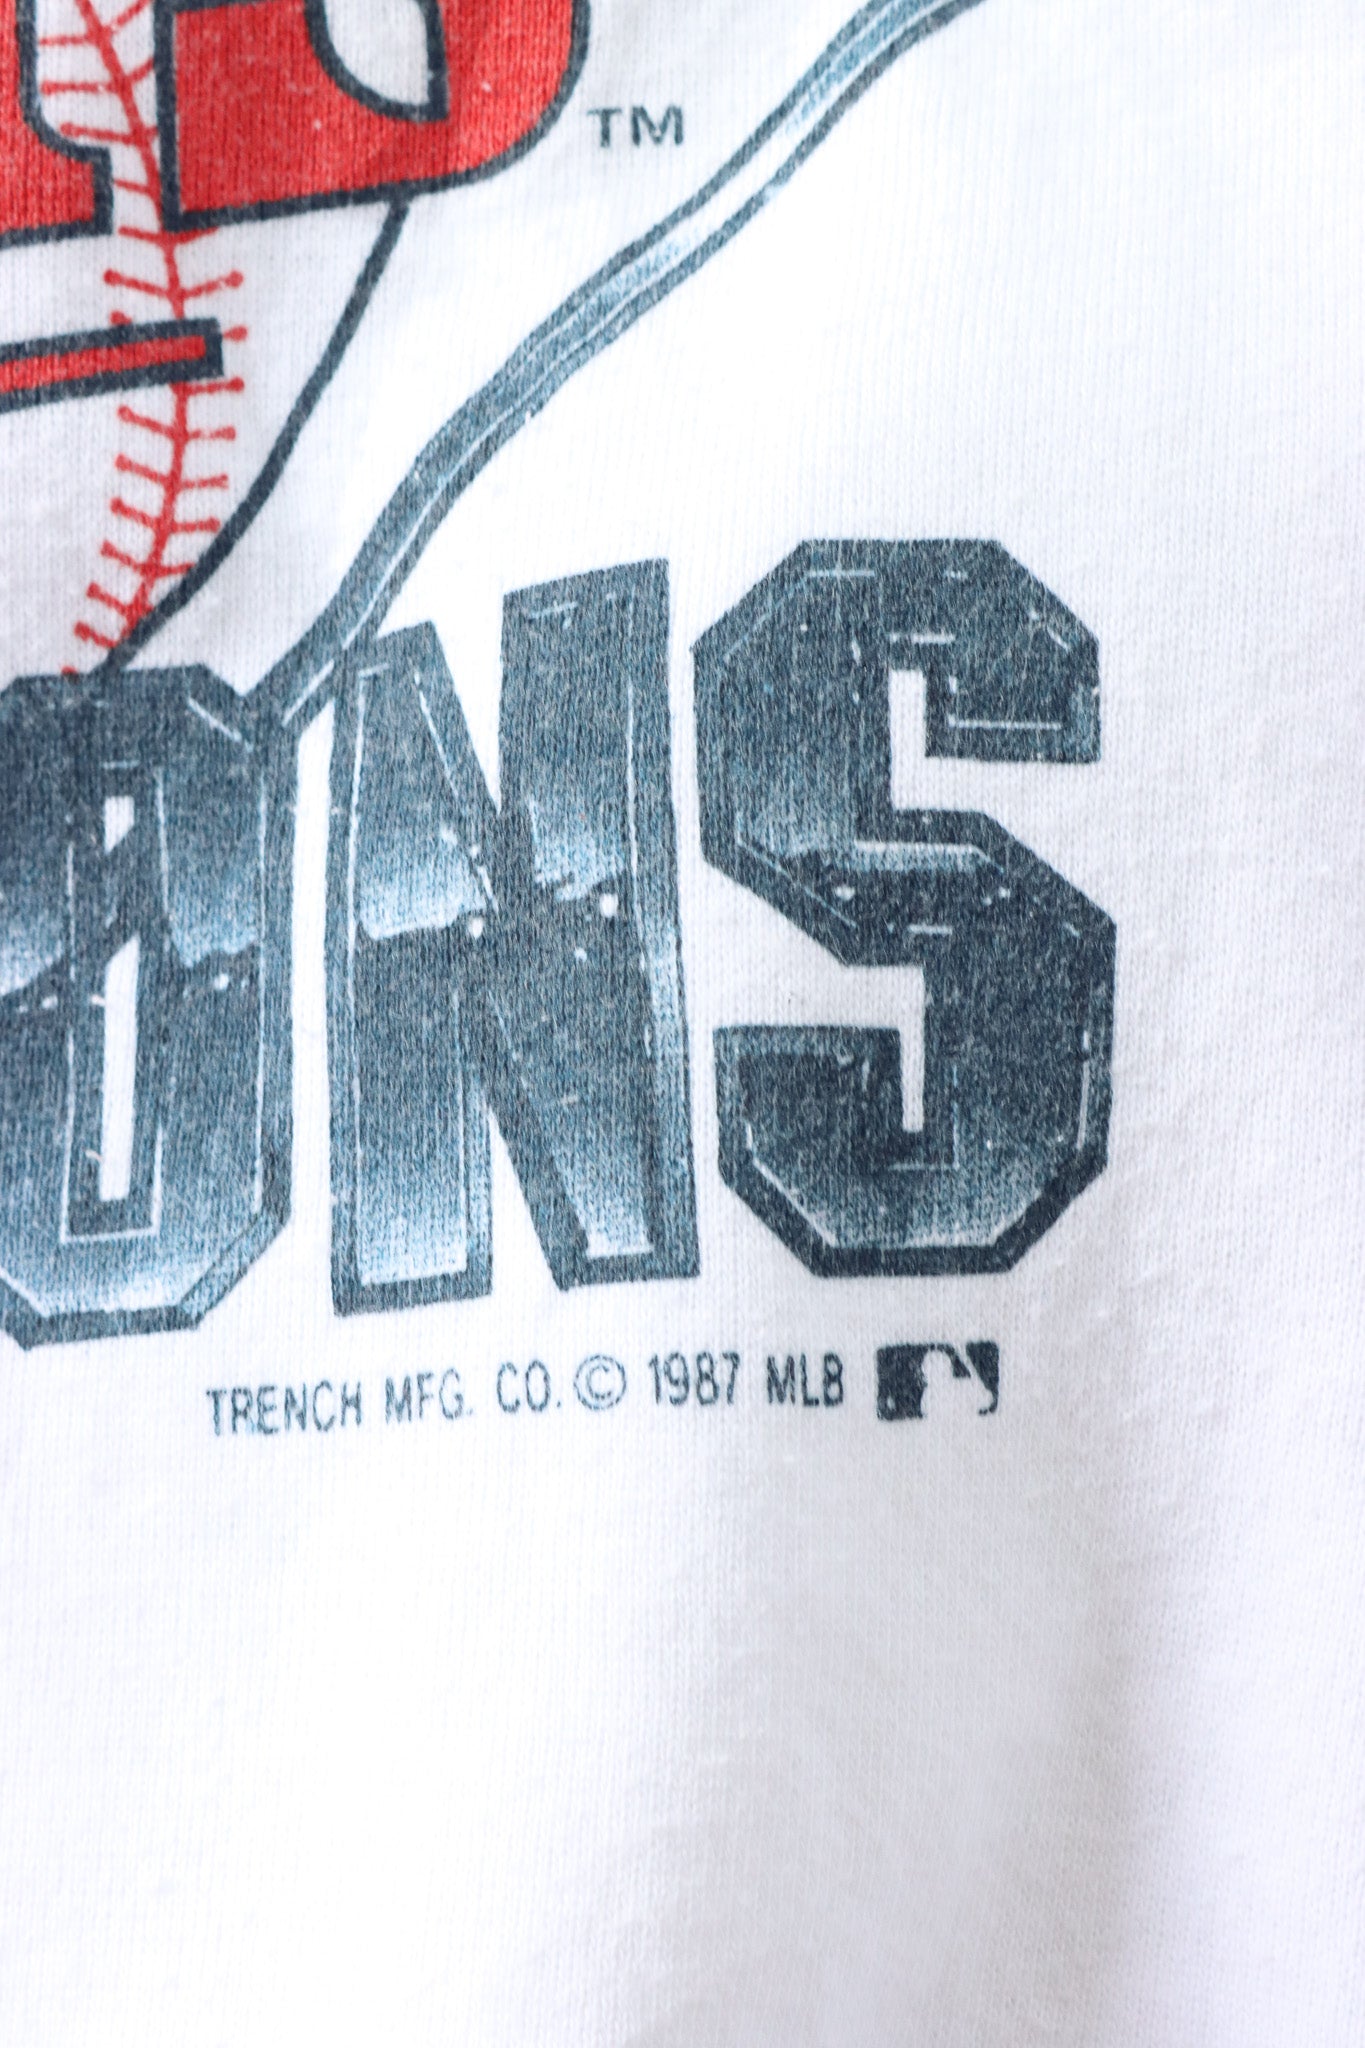 Vintage 1987 Twins Sweater Small